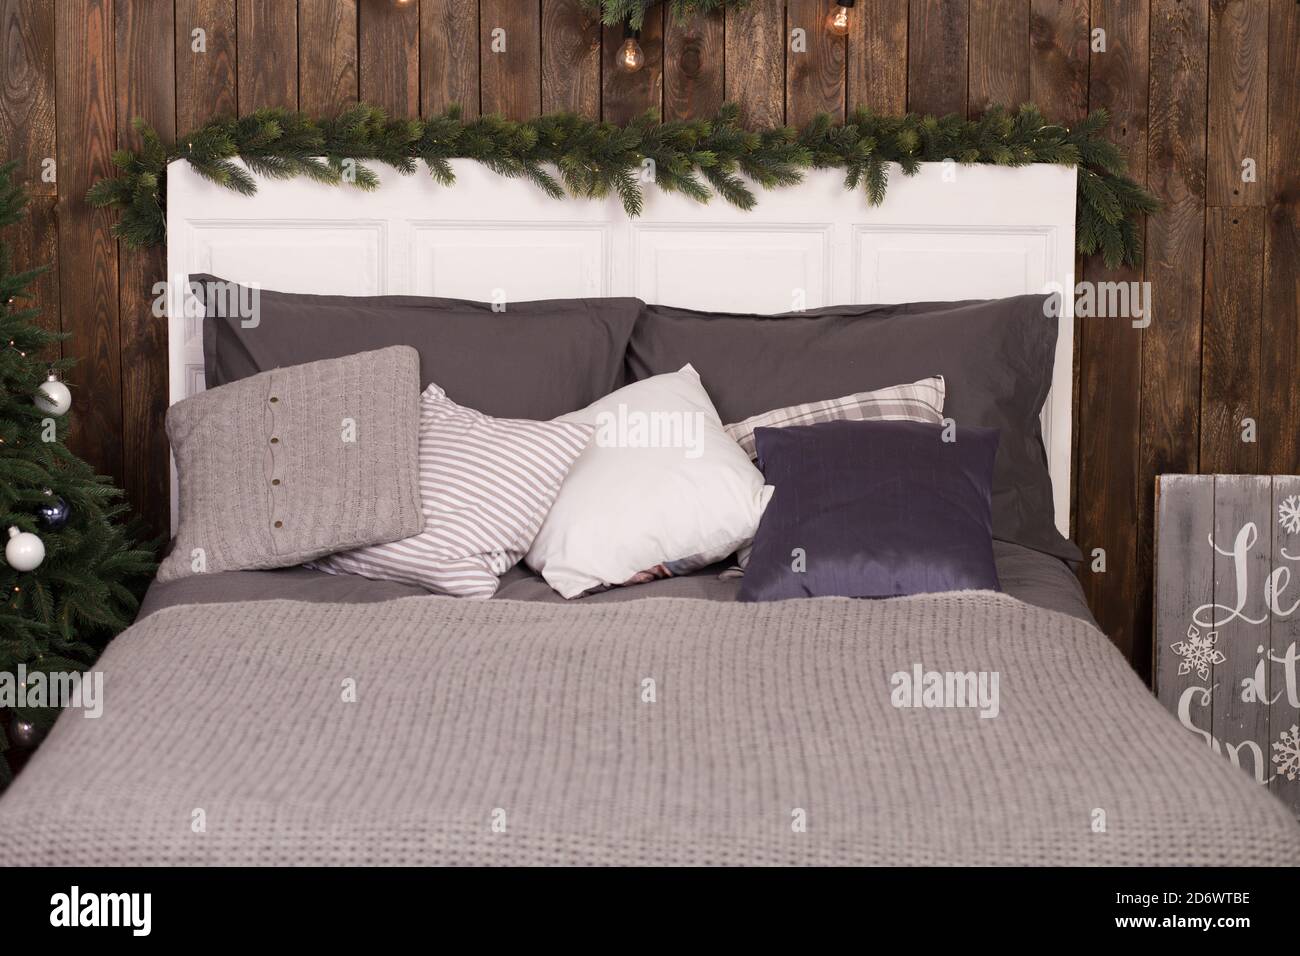 https://c8.alamy.com/comp/2D6WTBE/cozy-christmas-home-interior-new-year-decorated-bedroom-2D6WTBE.jpg